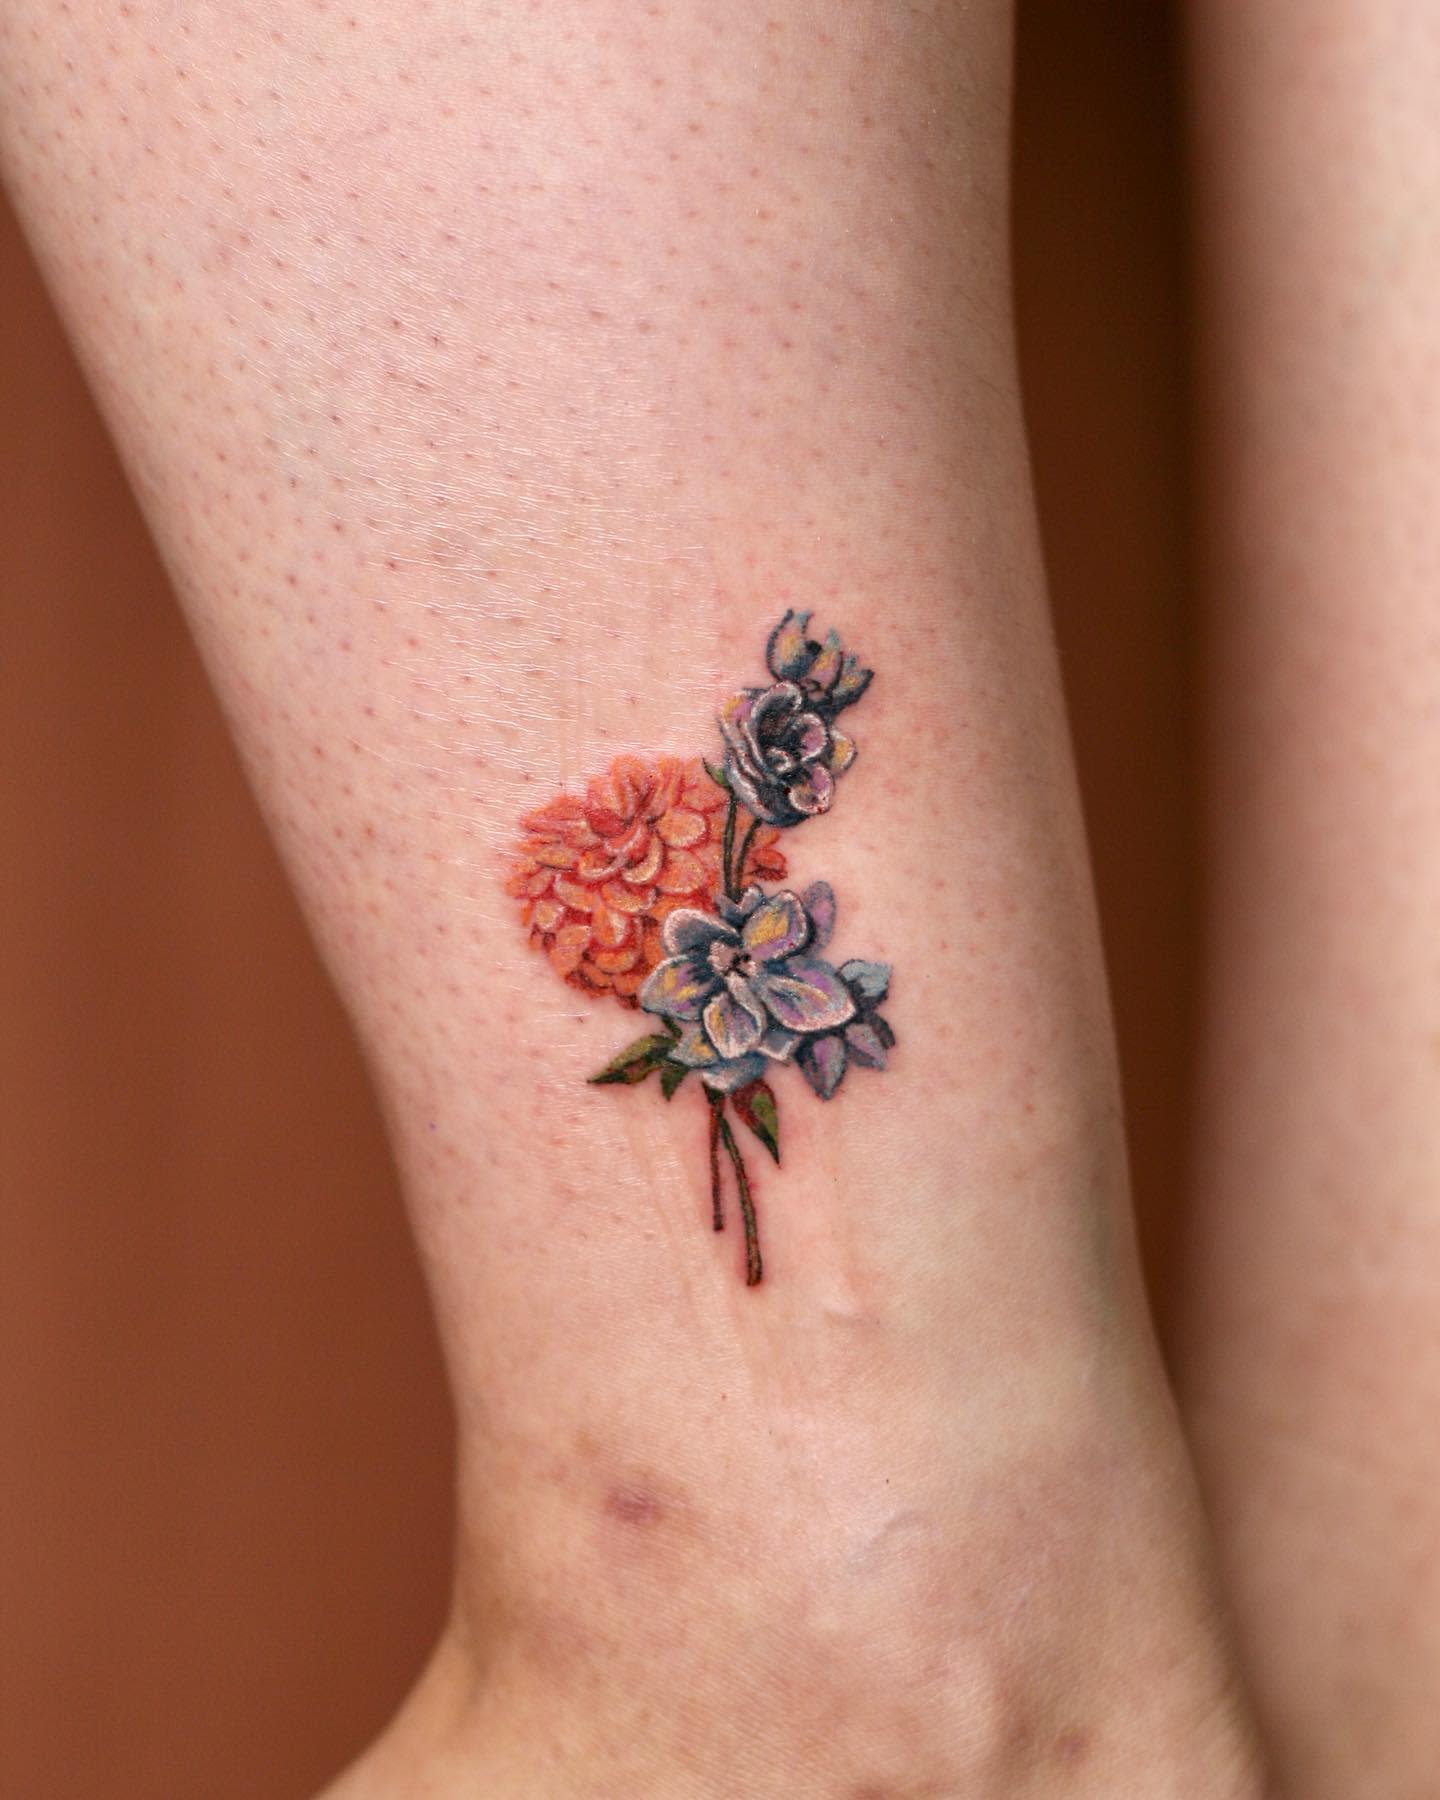 Buy Dahlia Temporary Tattoo  Flower Tattoo  Floral Tattoo Online in India   Etsy